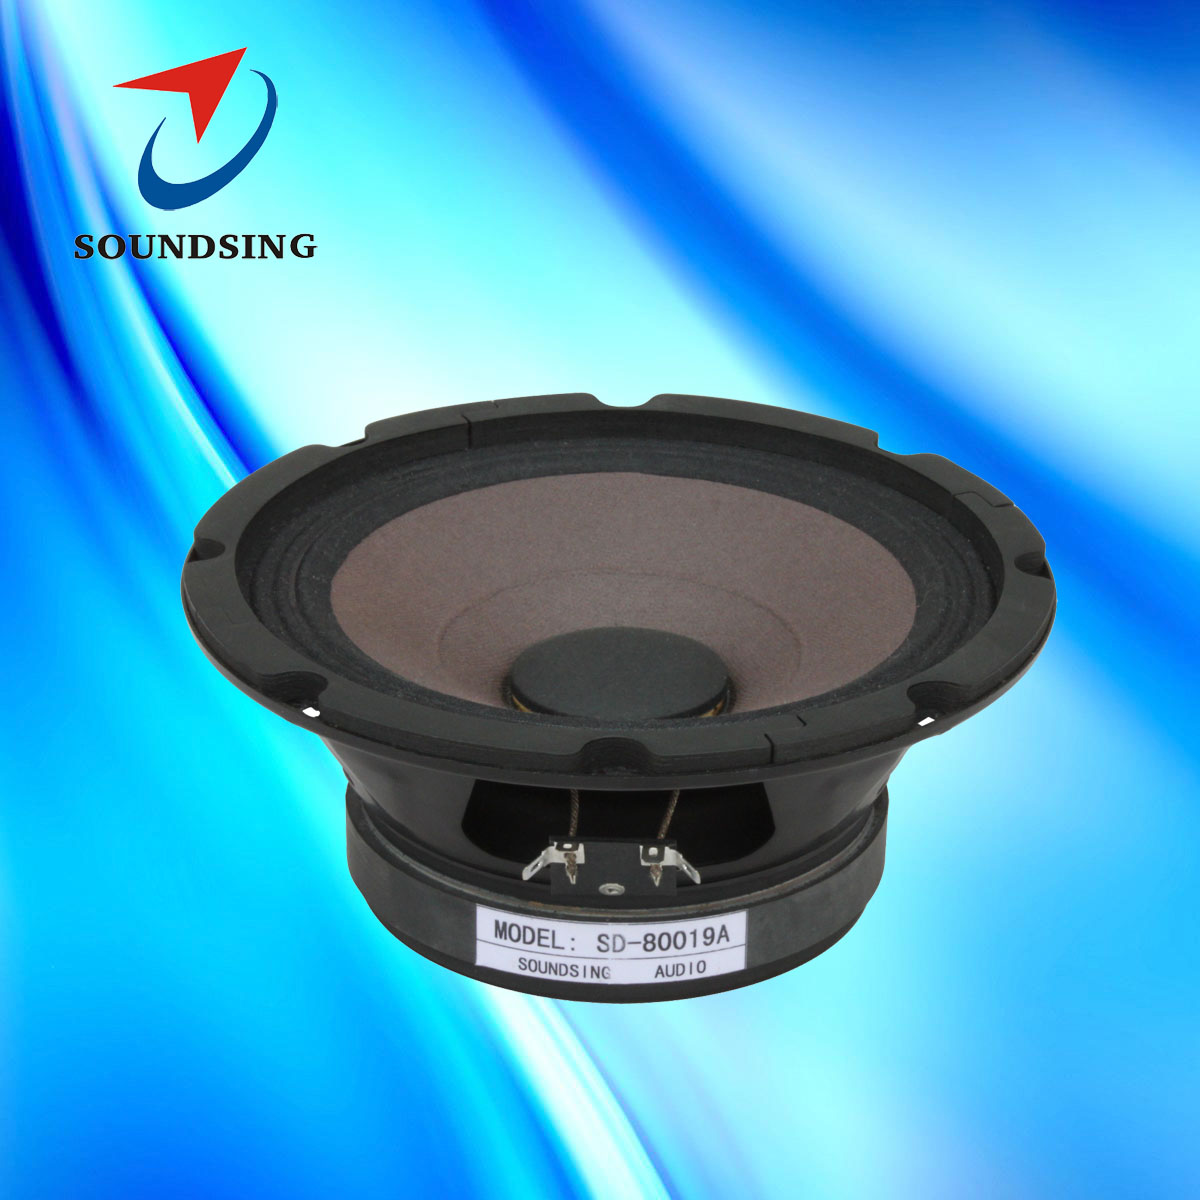 SD-80019A 8"monitor speakers